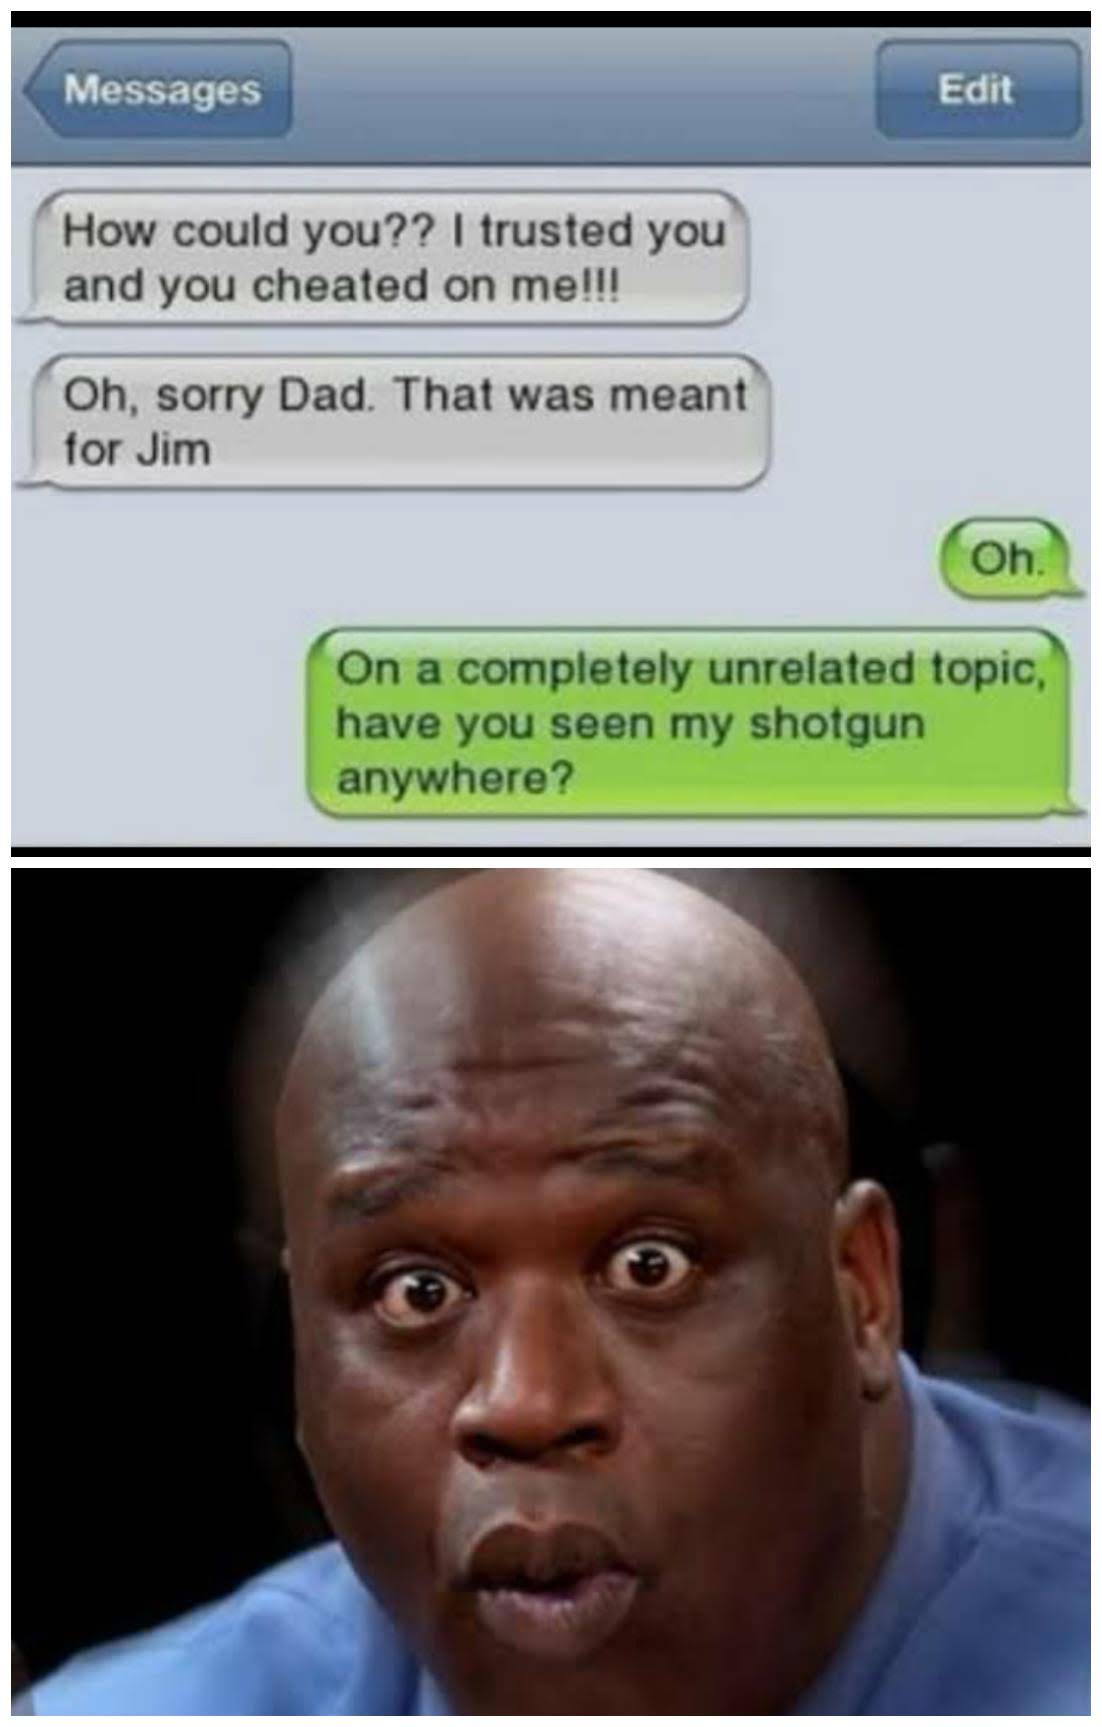 dank memes - time traveler memes nfl - Messages Edit How could you?? I trusted you and you cheated on me!!! Oh, sorry Dad. That was meant for Jim Oh, On a completely unrelated topic, have you seen my shotgun anywhere?